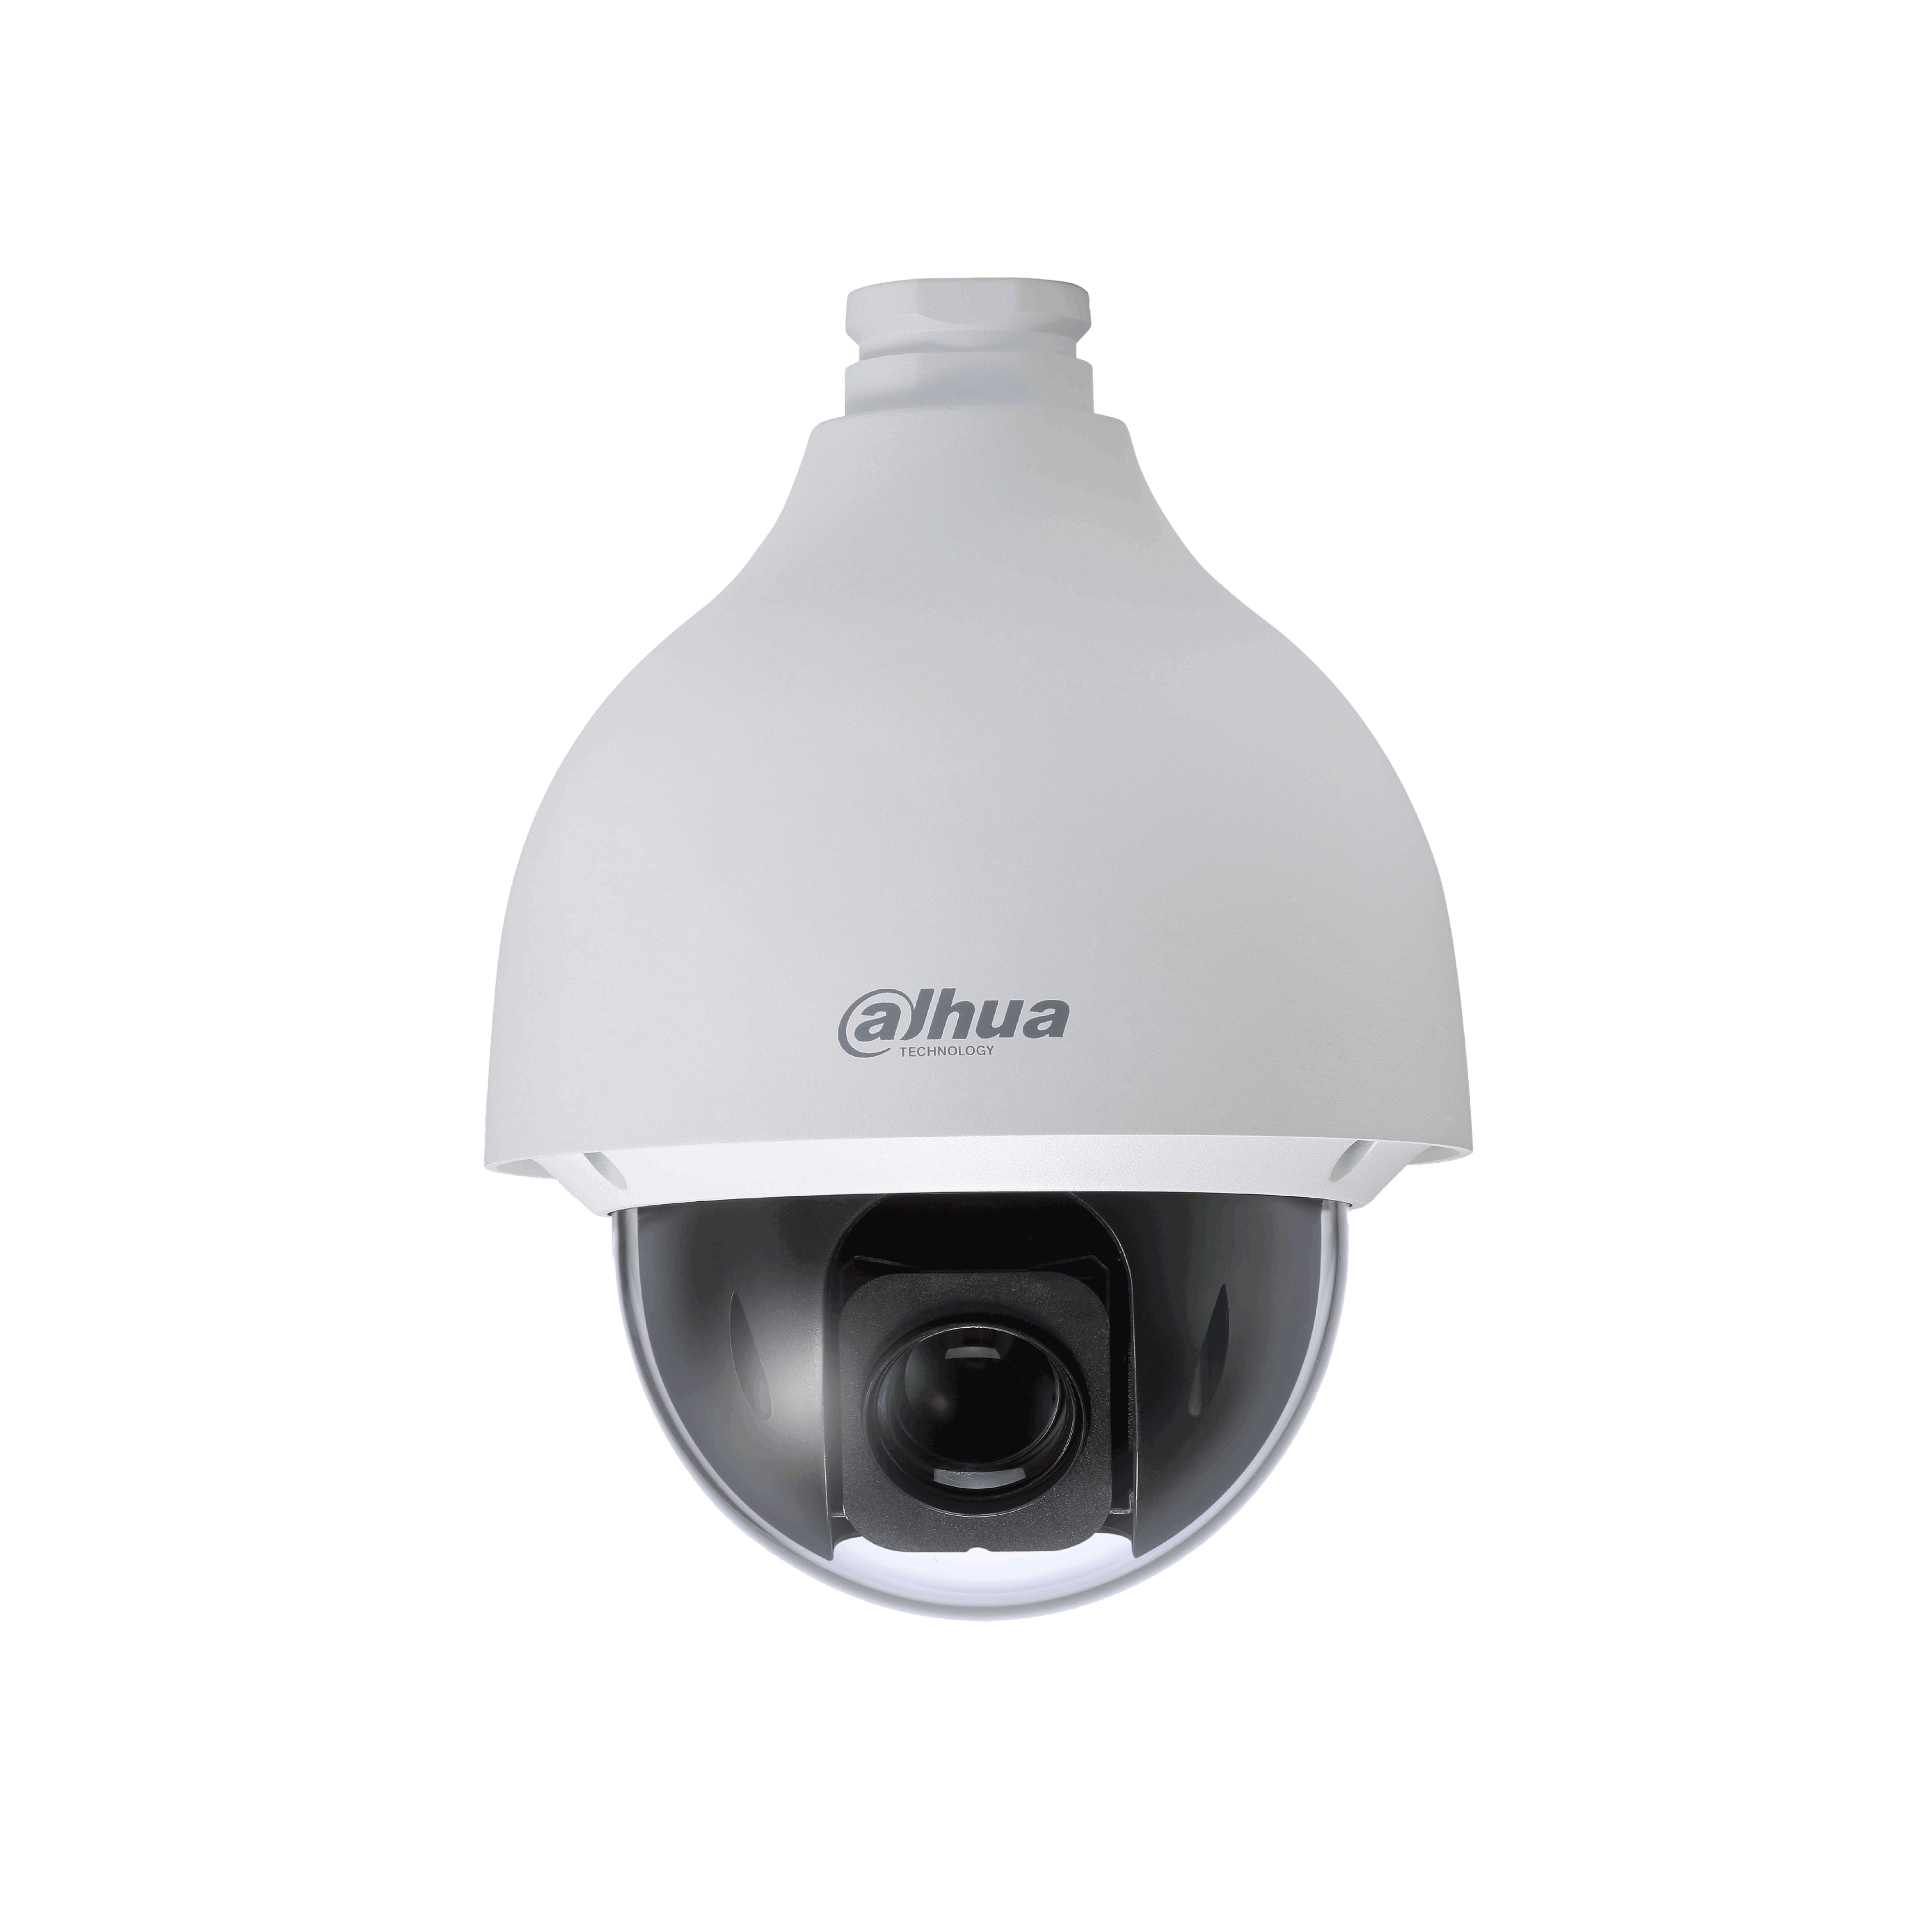 WIZSENSE SERIES IP CAMERA WHITE AI AUTO TRACKING 2MP/1080P H.264/4+/5/5+ SPEED DOME PTZ 120 WDR METAL 4.5-144MMMOTORISED LENS 32X ZOOM STARLIGHT POE+ IP67 WITHOUT MIC AUDIO IN AUDIO OUT 2 x ALARM IN 1 x ALARM OUT SUPPORT UP TO 512GB SDIK10 24VDC